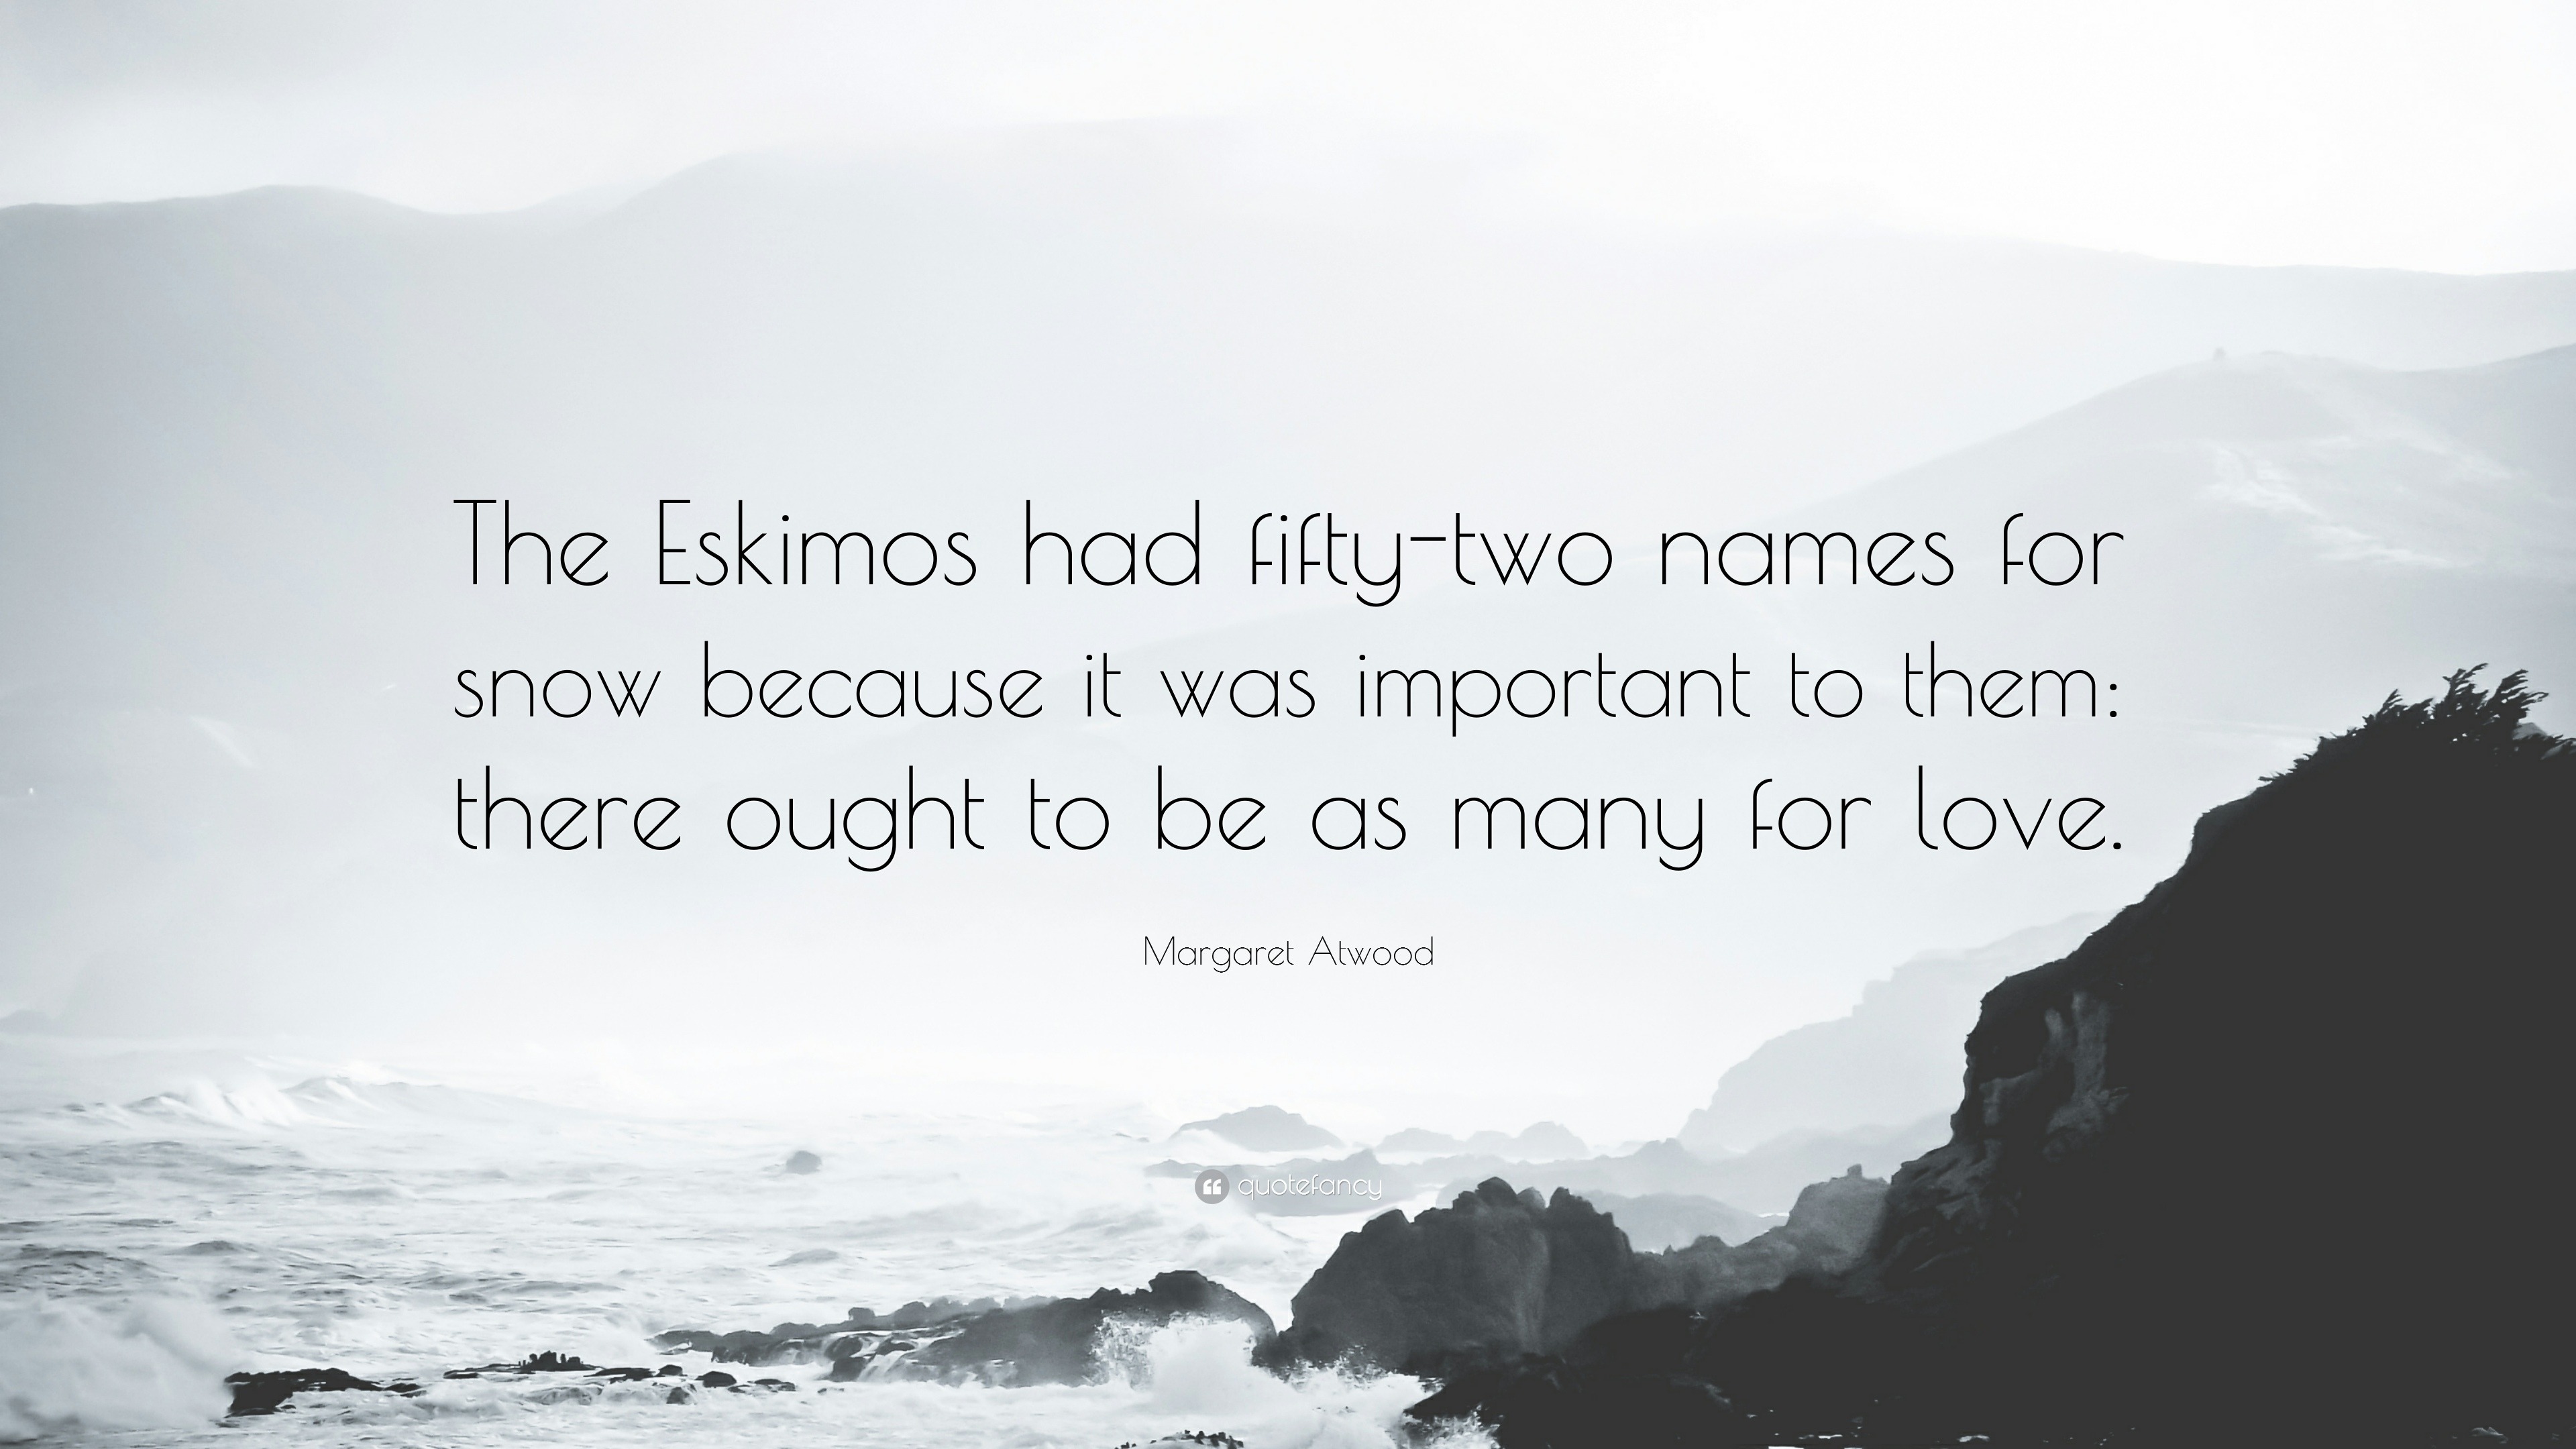 Valentine s Day Quotes “The Eskimos had fifty two names for snow because it